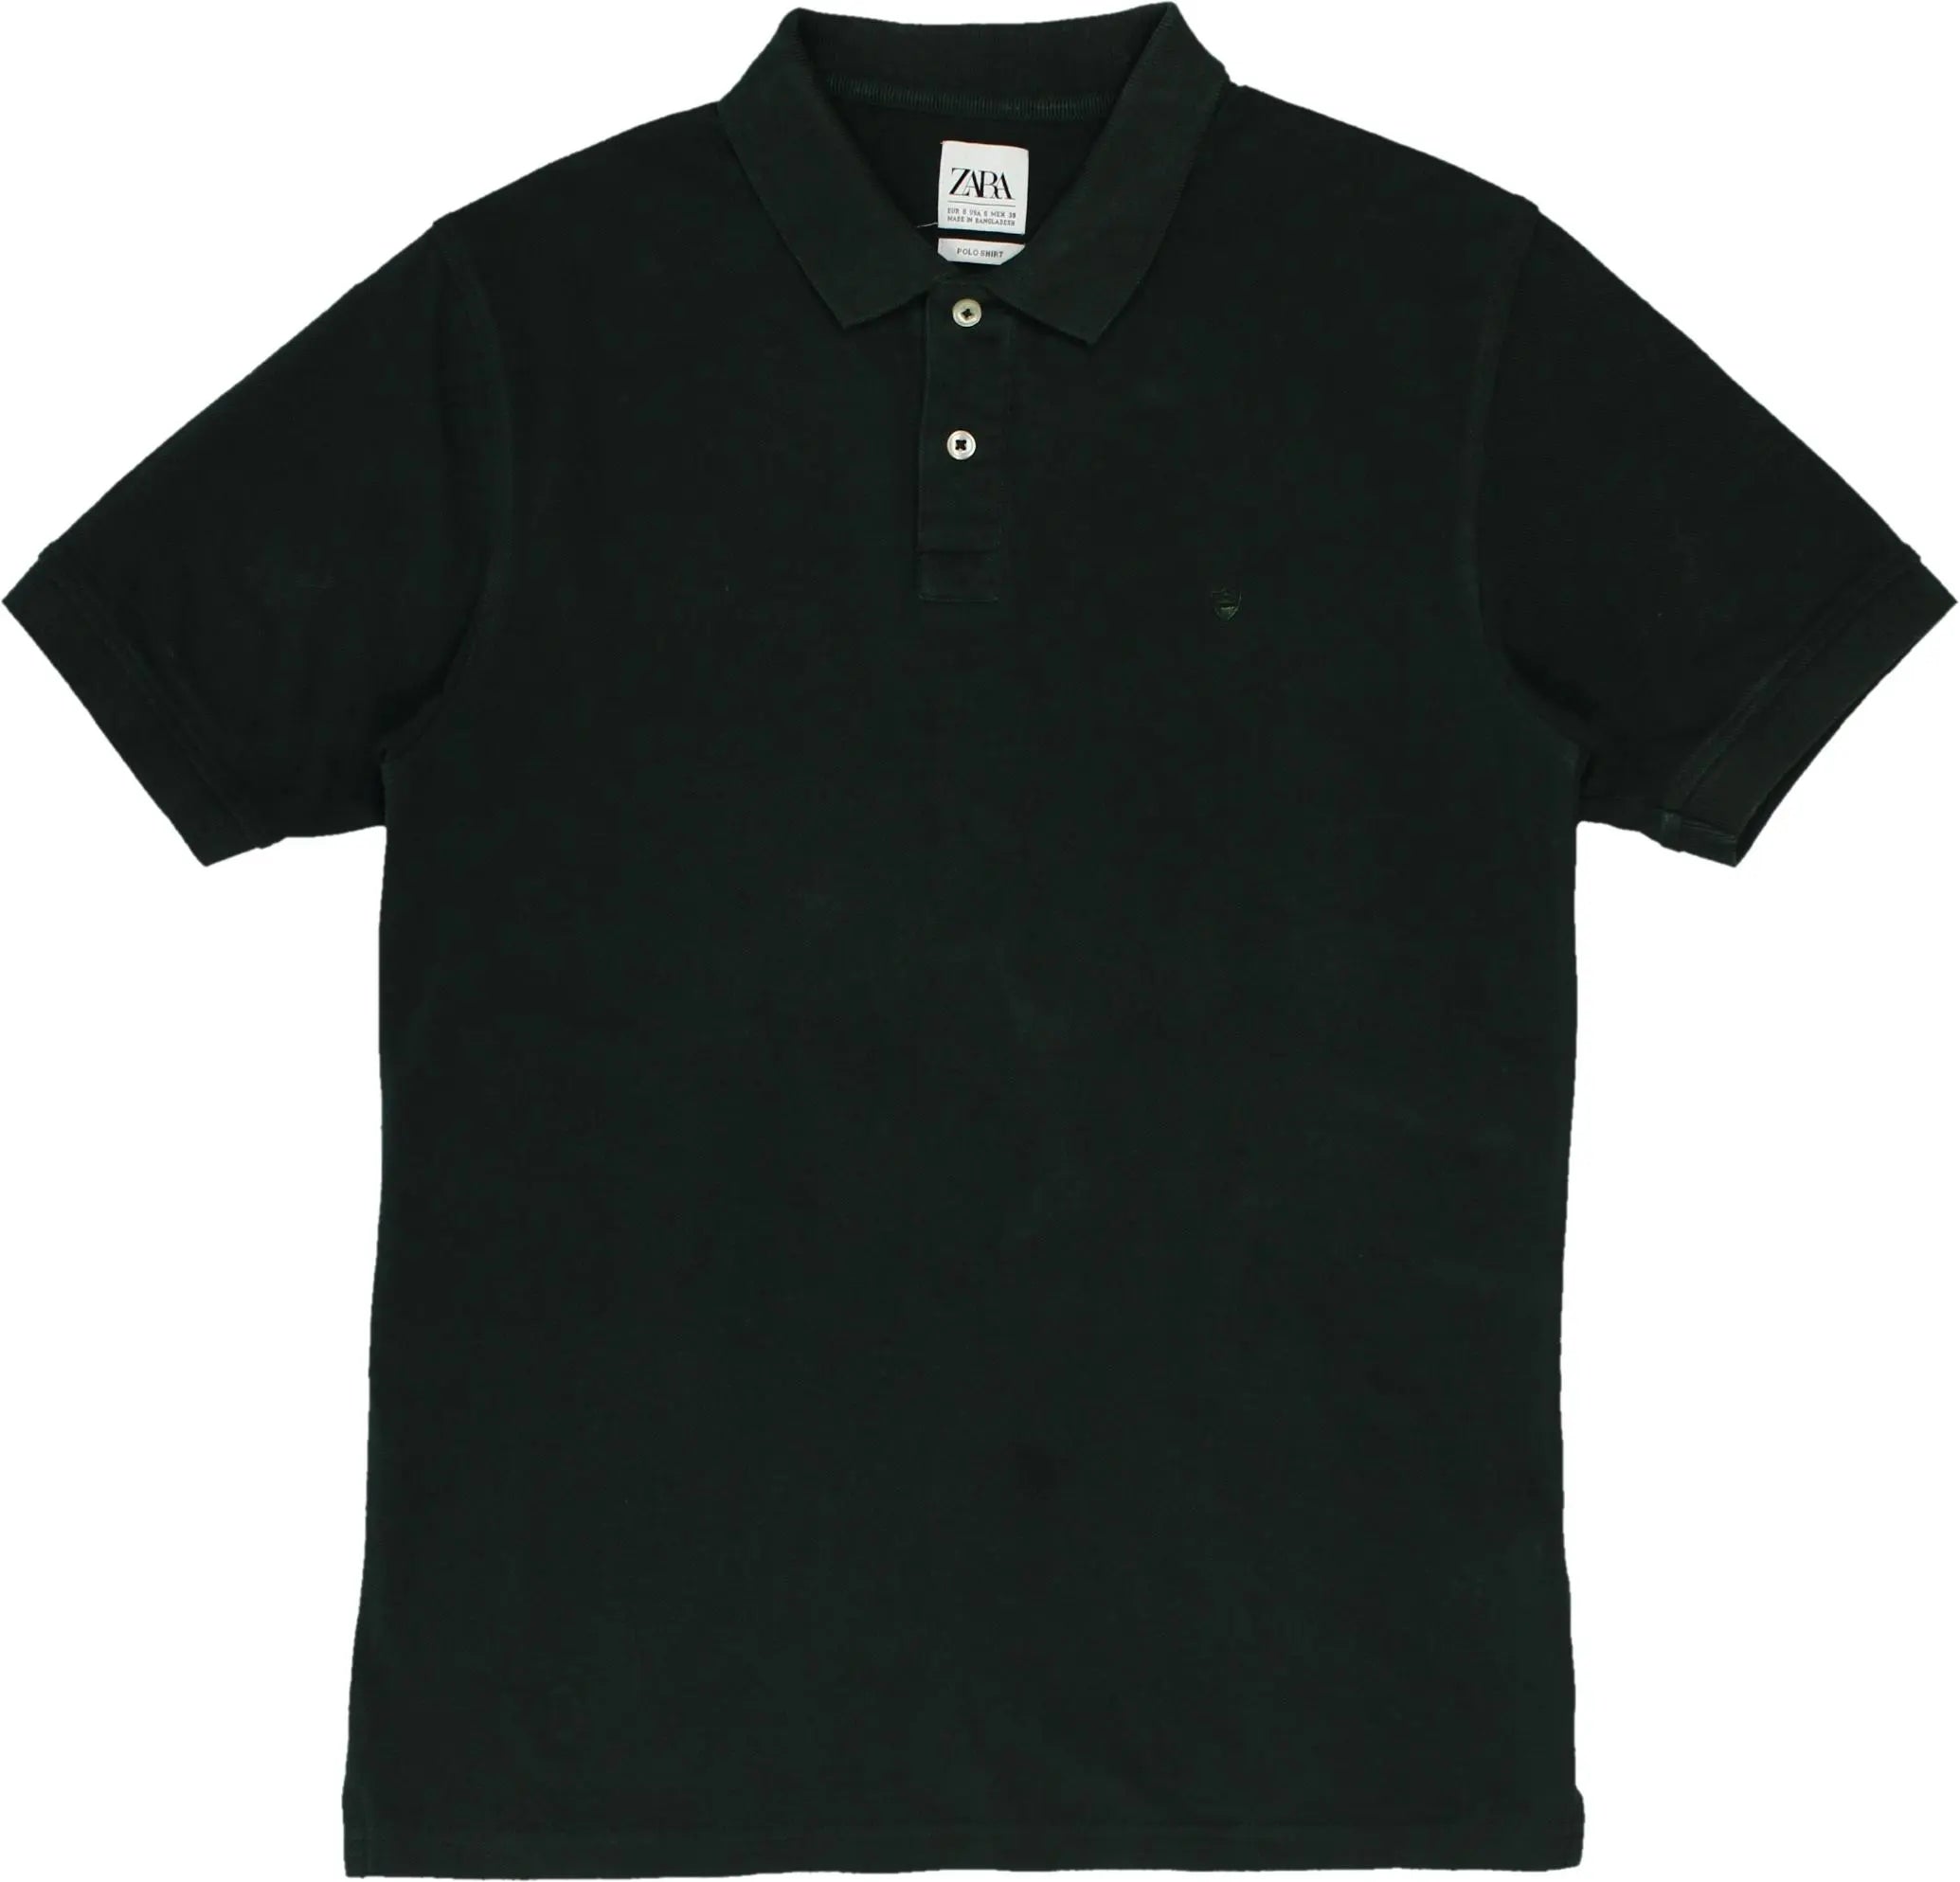 Zara - Polo Shirt- ThriftTale.com - Vintage and second handclothing